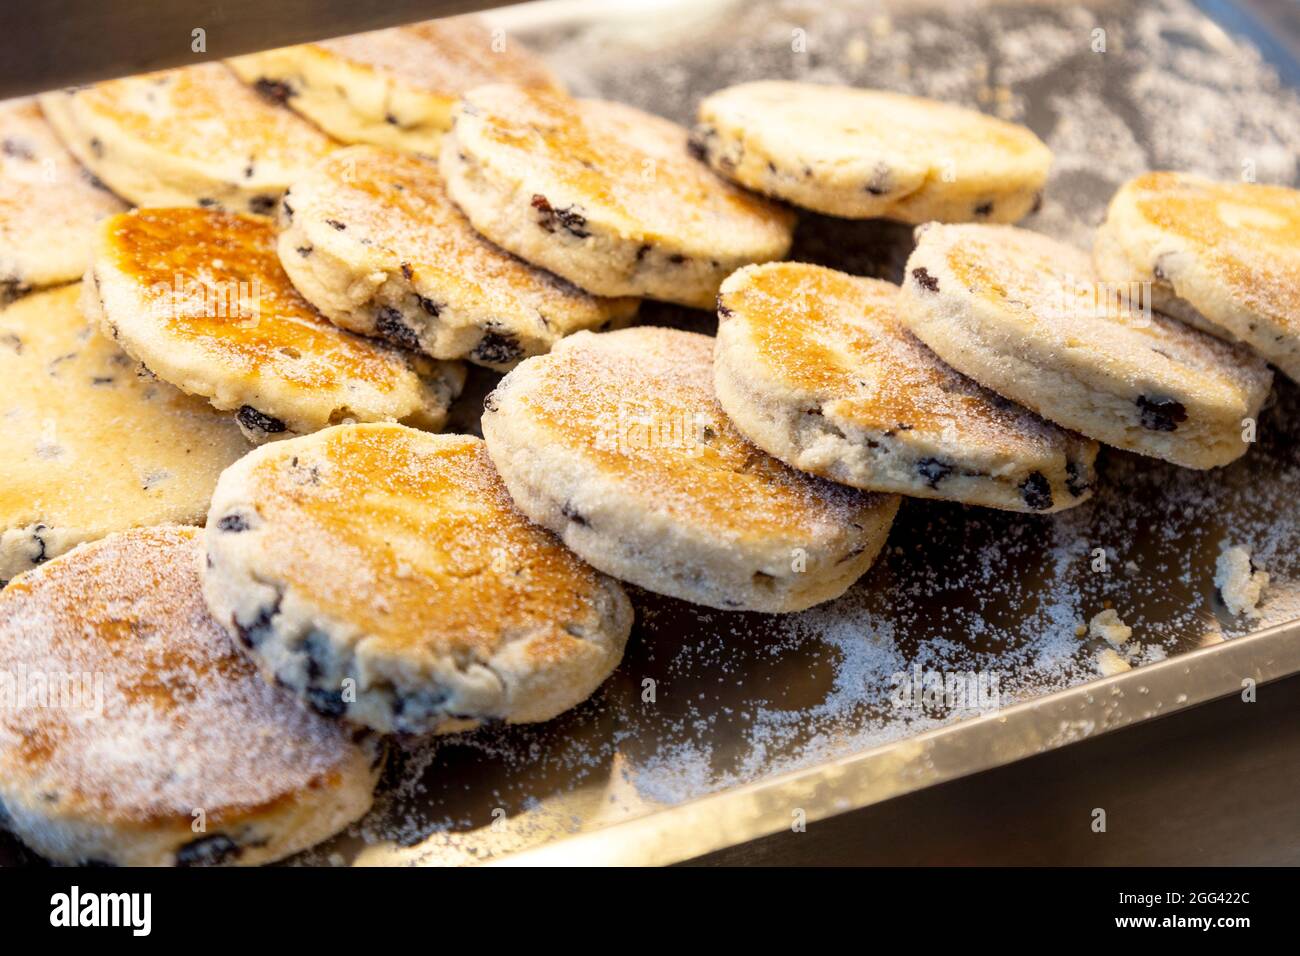 Welsh cakes at the Popty Conwy Bakery, Wales, UK Stock Photo